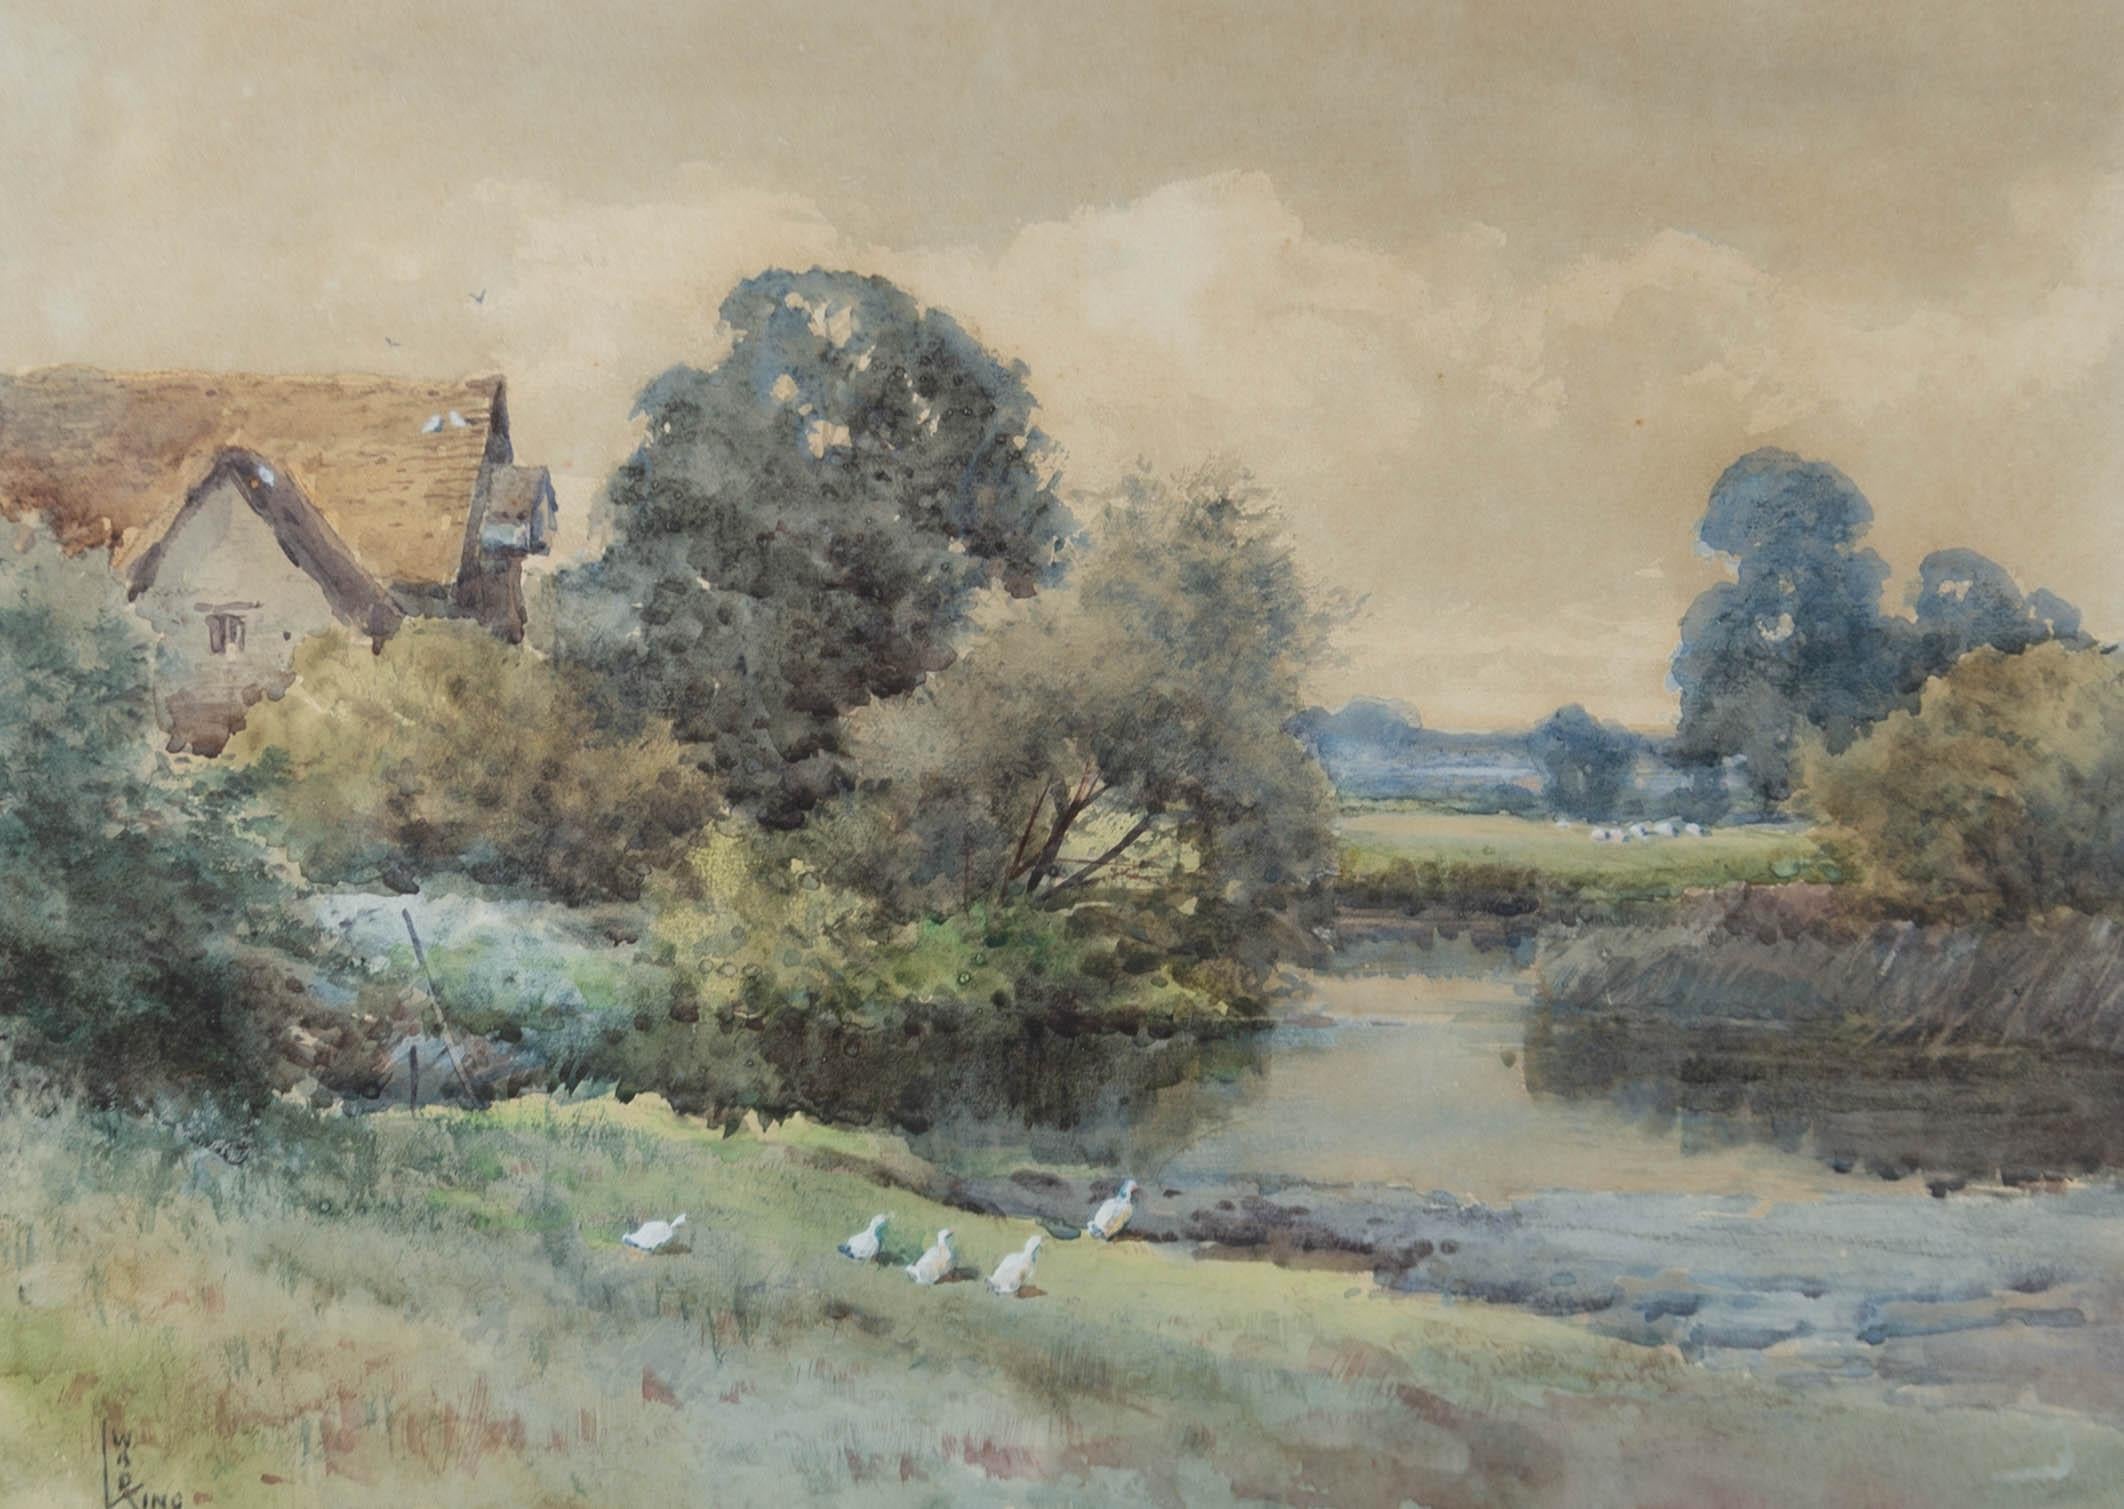 W.A.D. King - Early 20th Century Watercolour, Ducks by the River For Sale 1